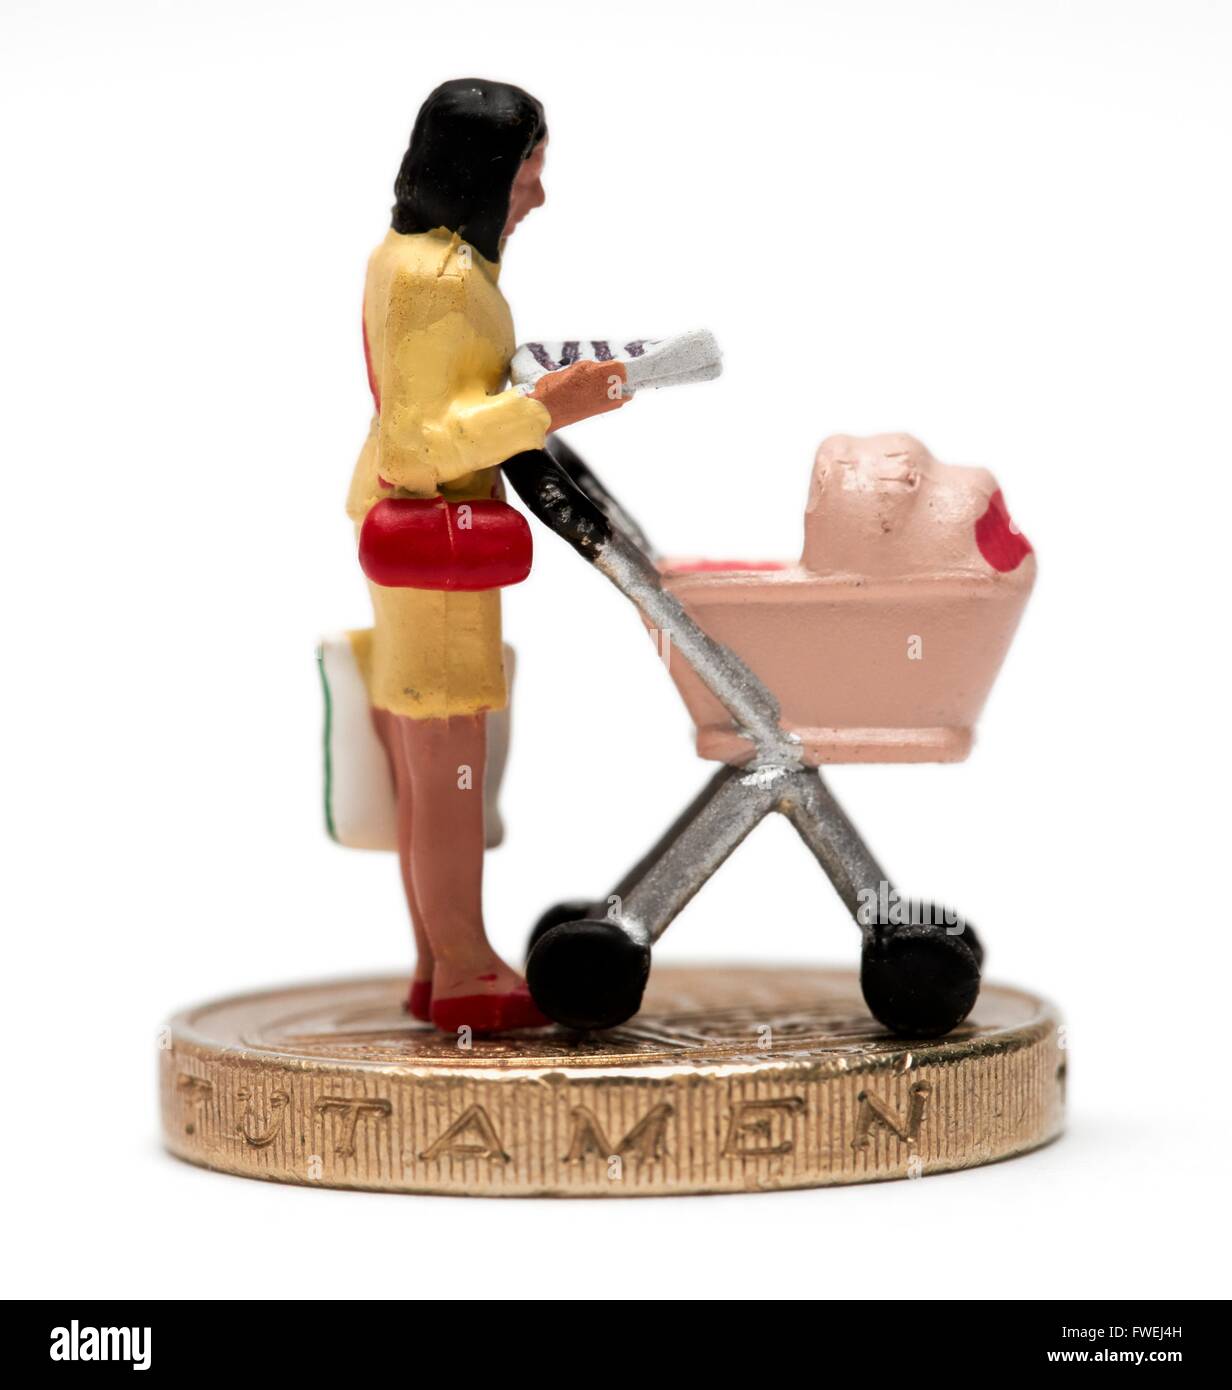 A single female miniature figurine parent with a pram standing on a pound coin Stock Photo